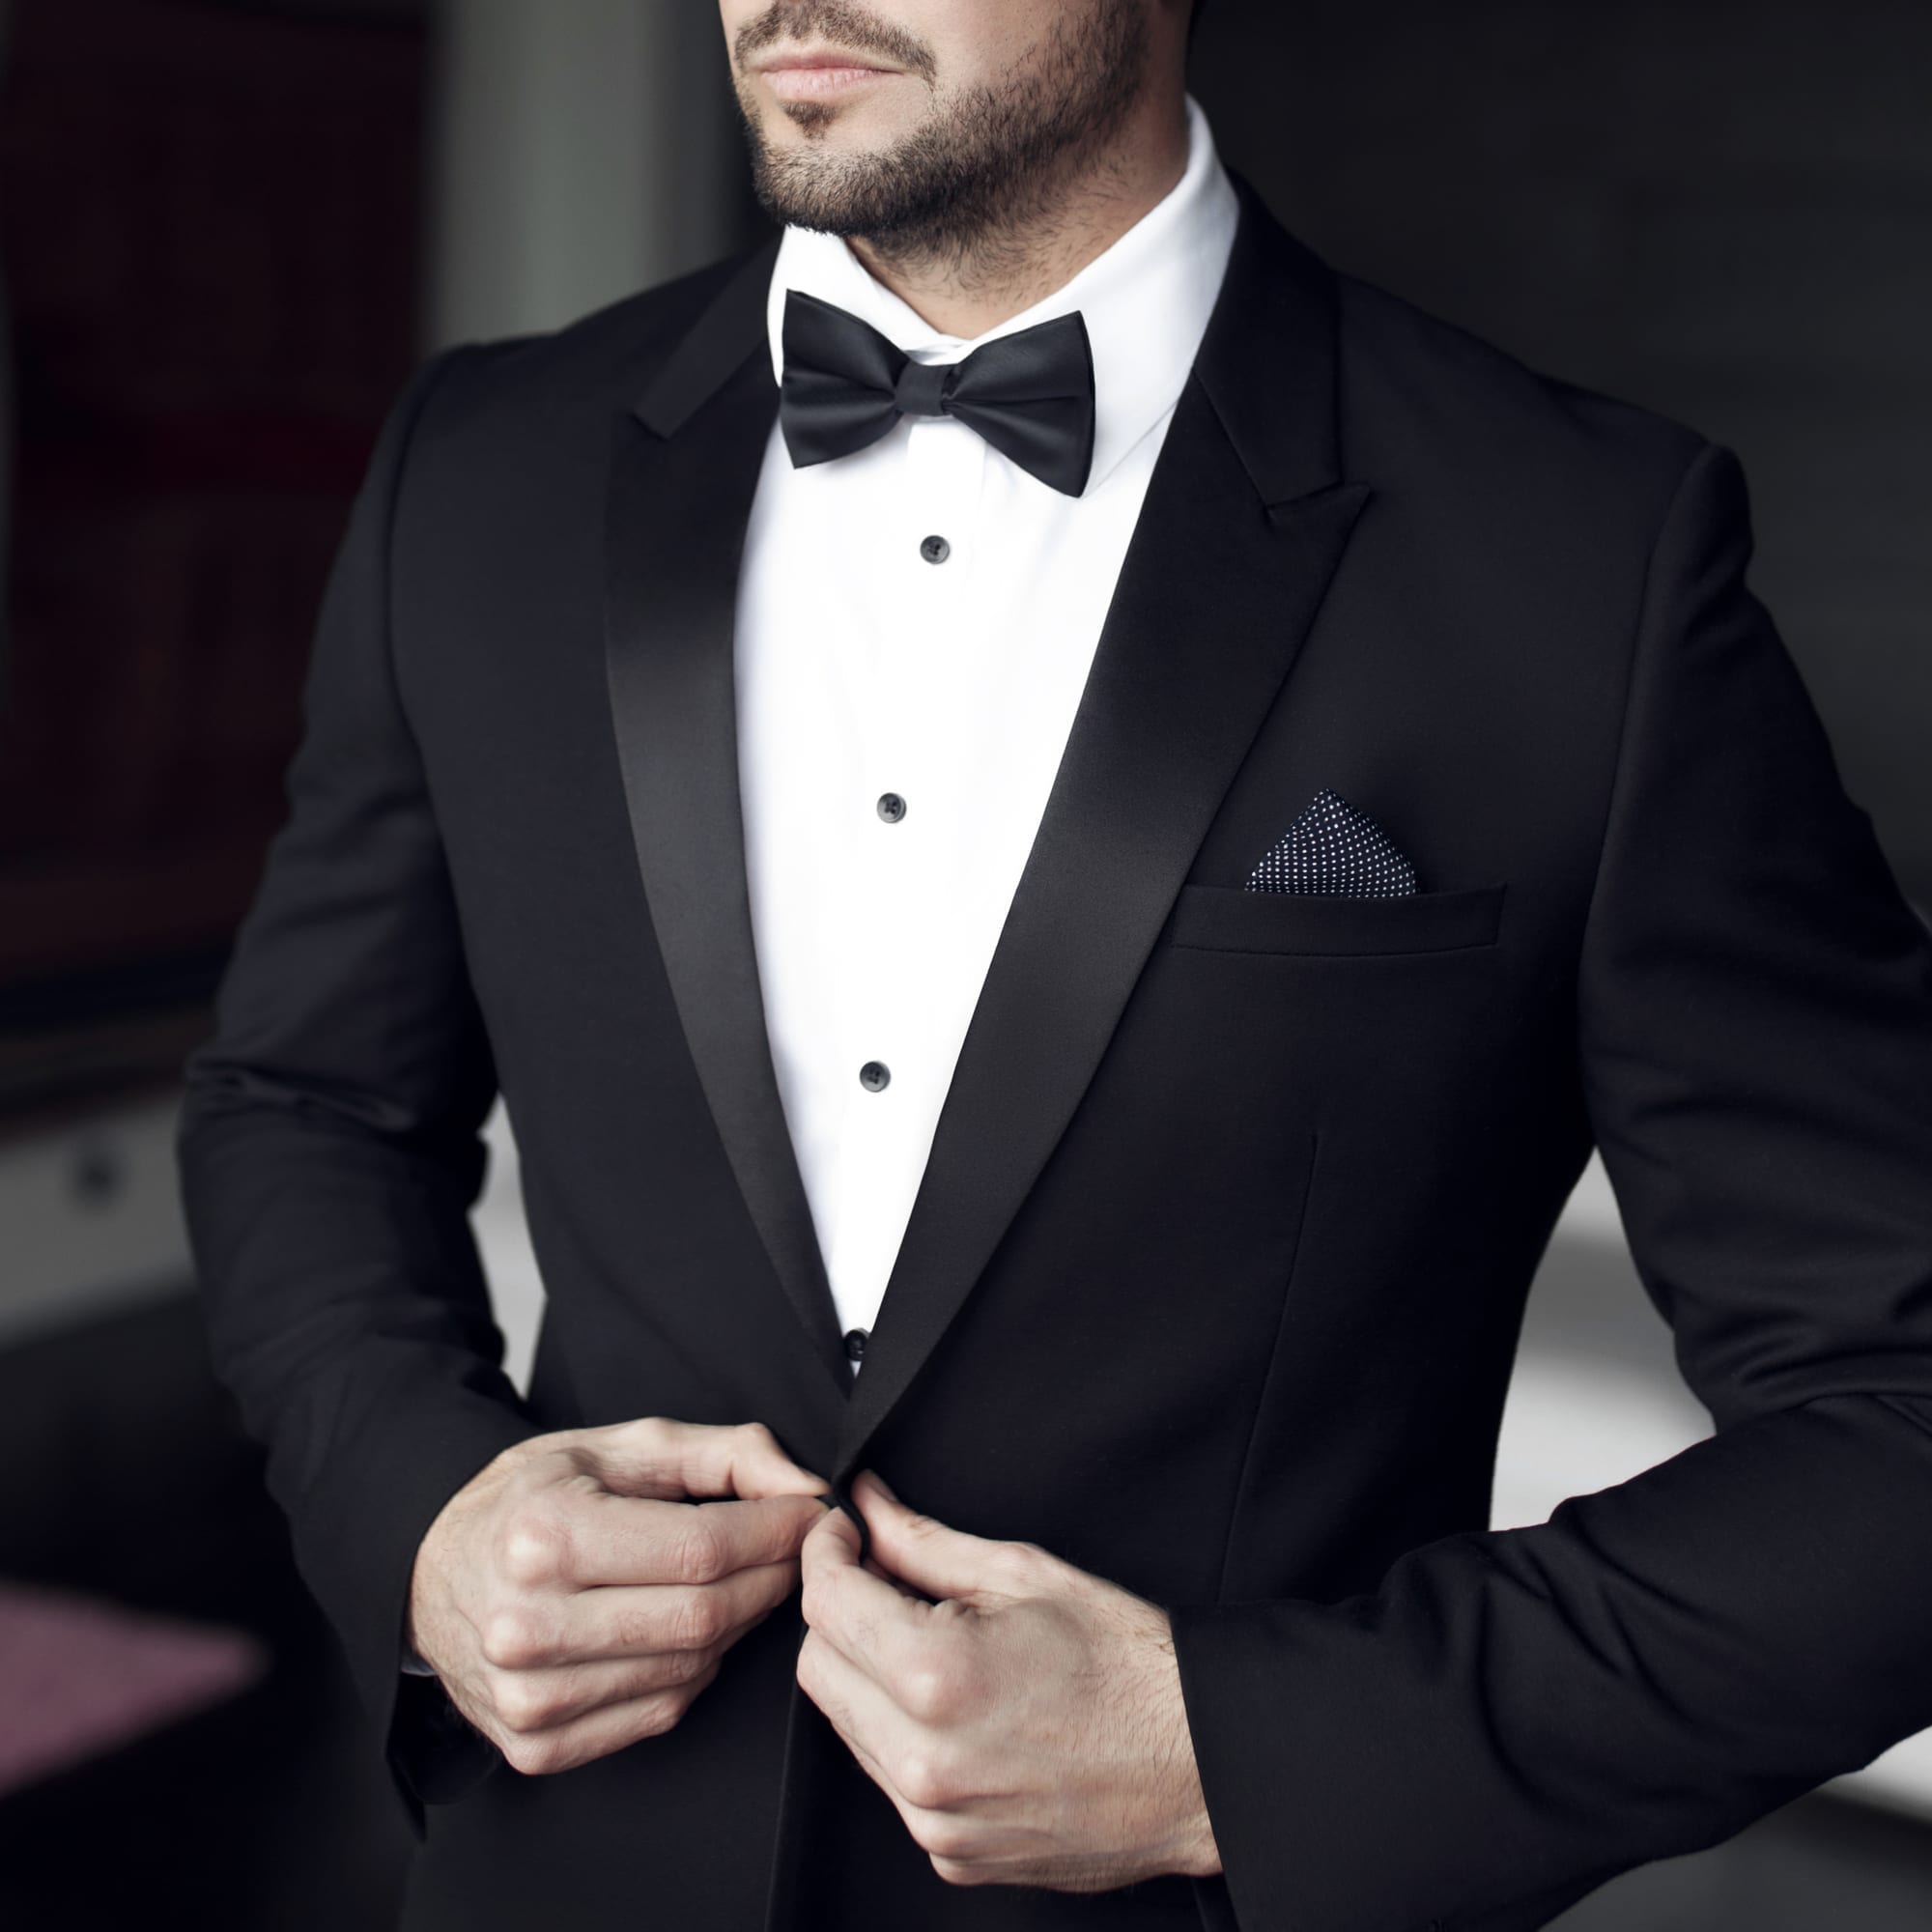 Man in tuxedo and bow tie showing black tie dress code